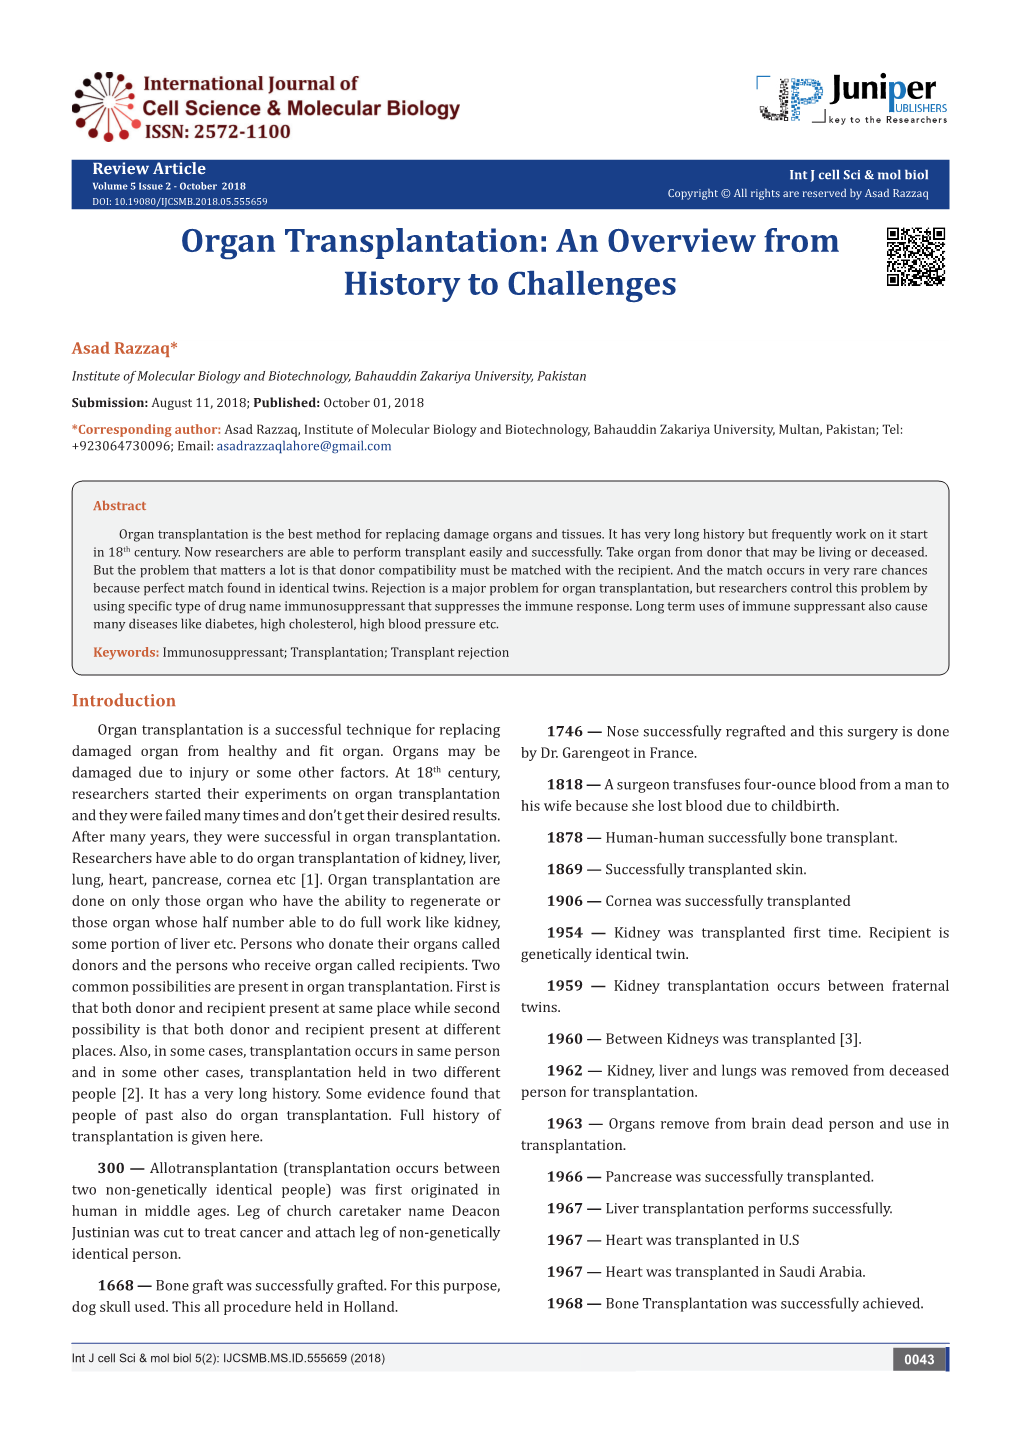 Organ Transplantation: an Overview from History to Challenges